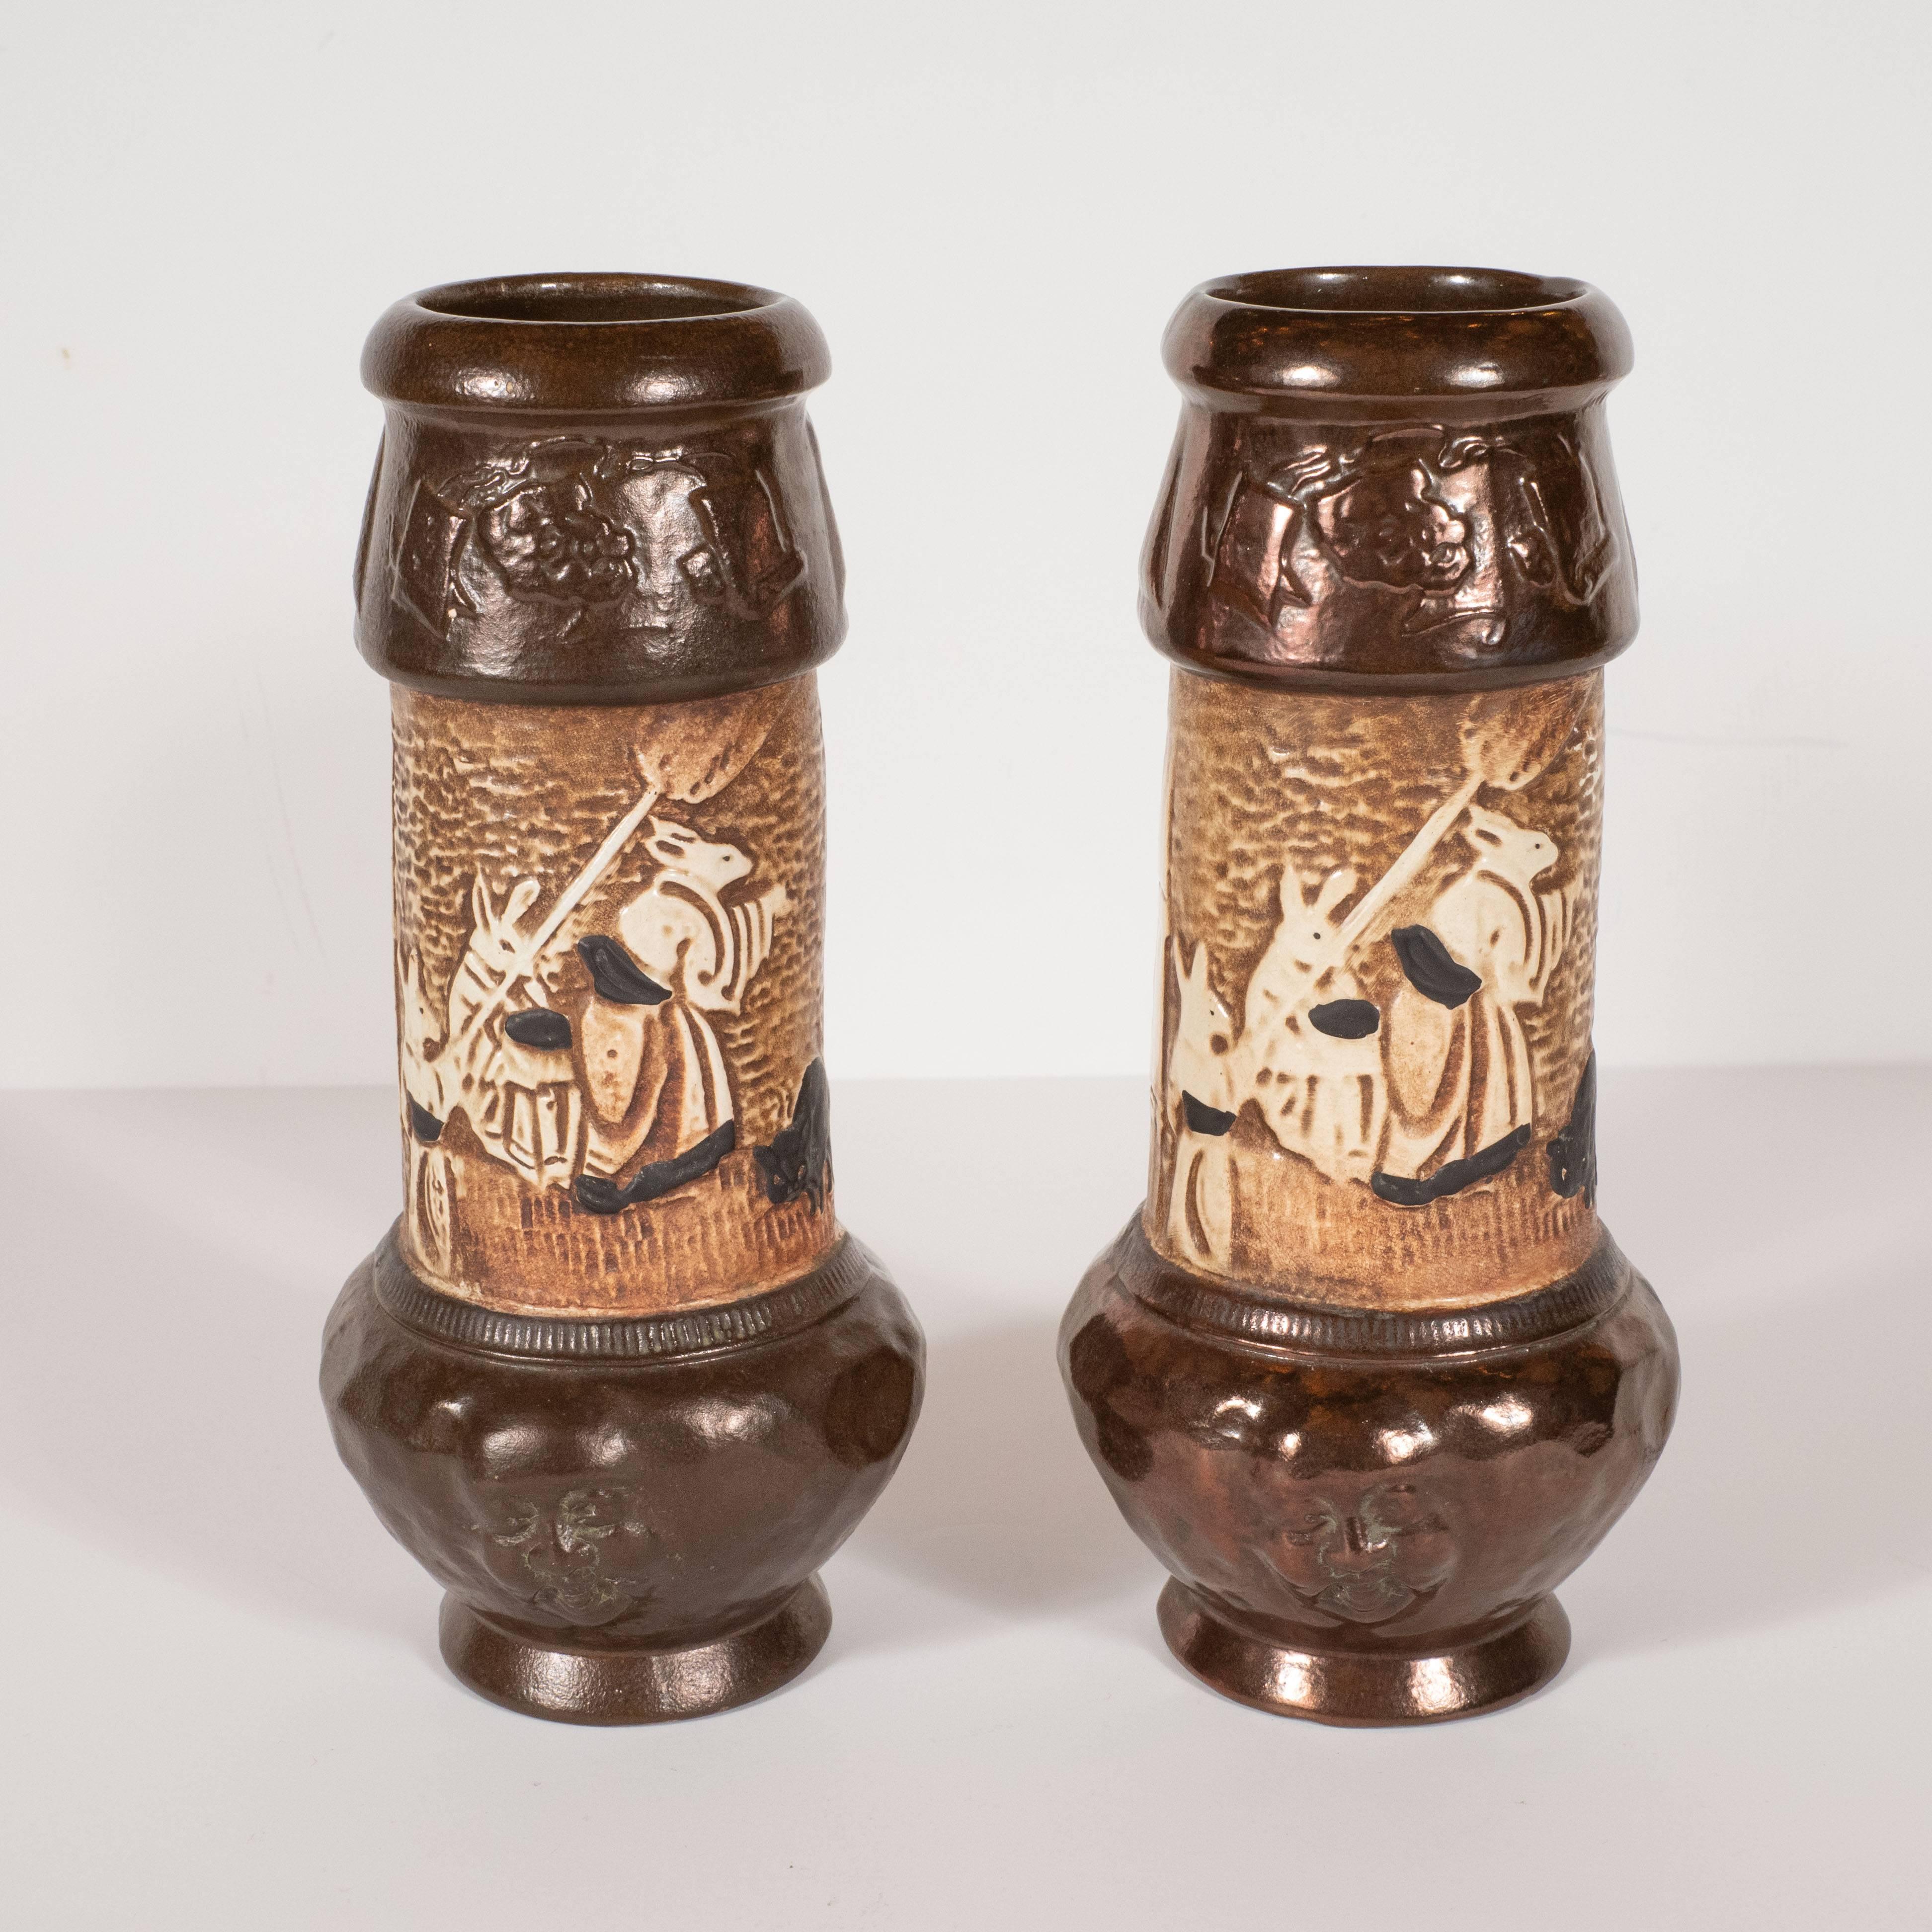 English Pair of Art Deco Hand-Painted Ceramic Vases with Orientalist Motifs by Bretby For Sale